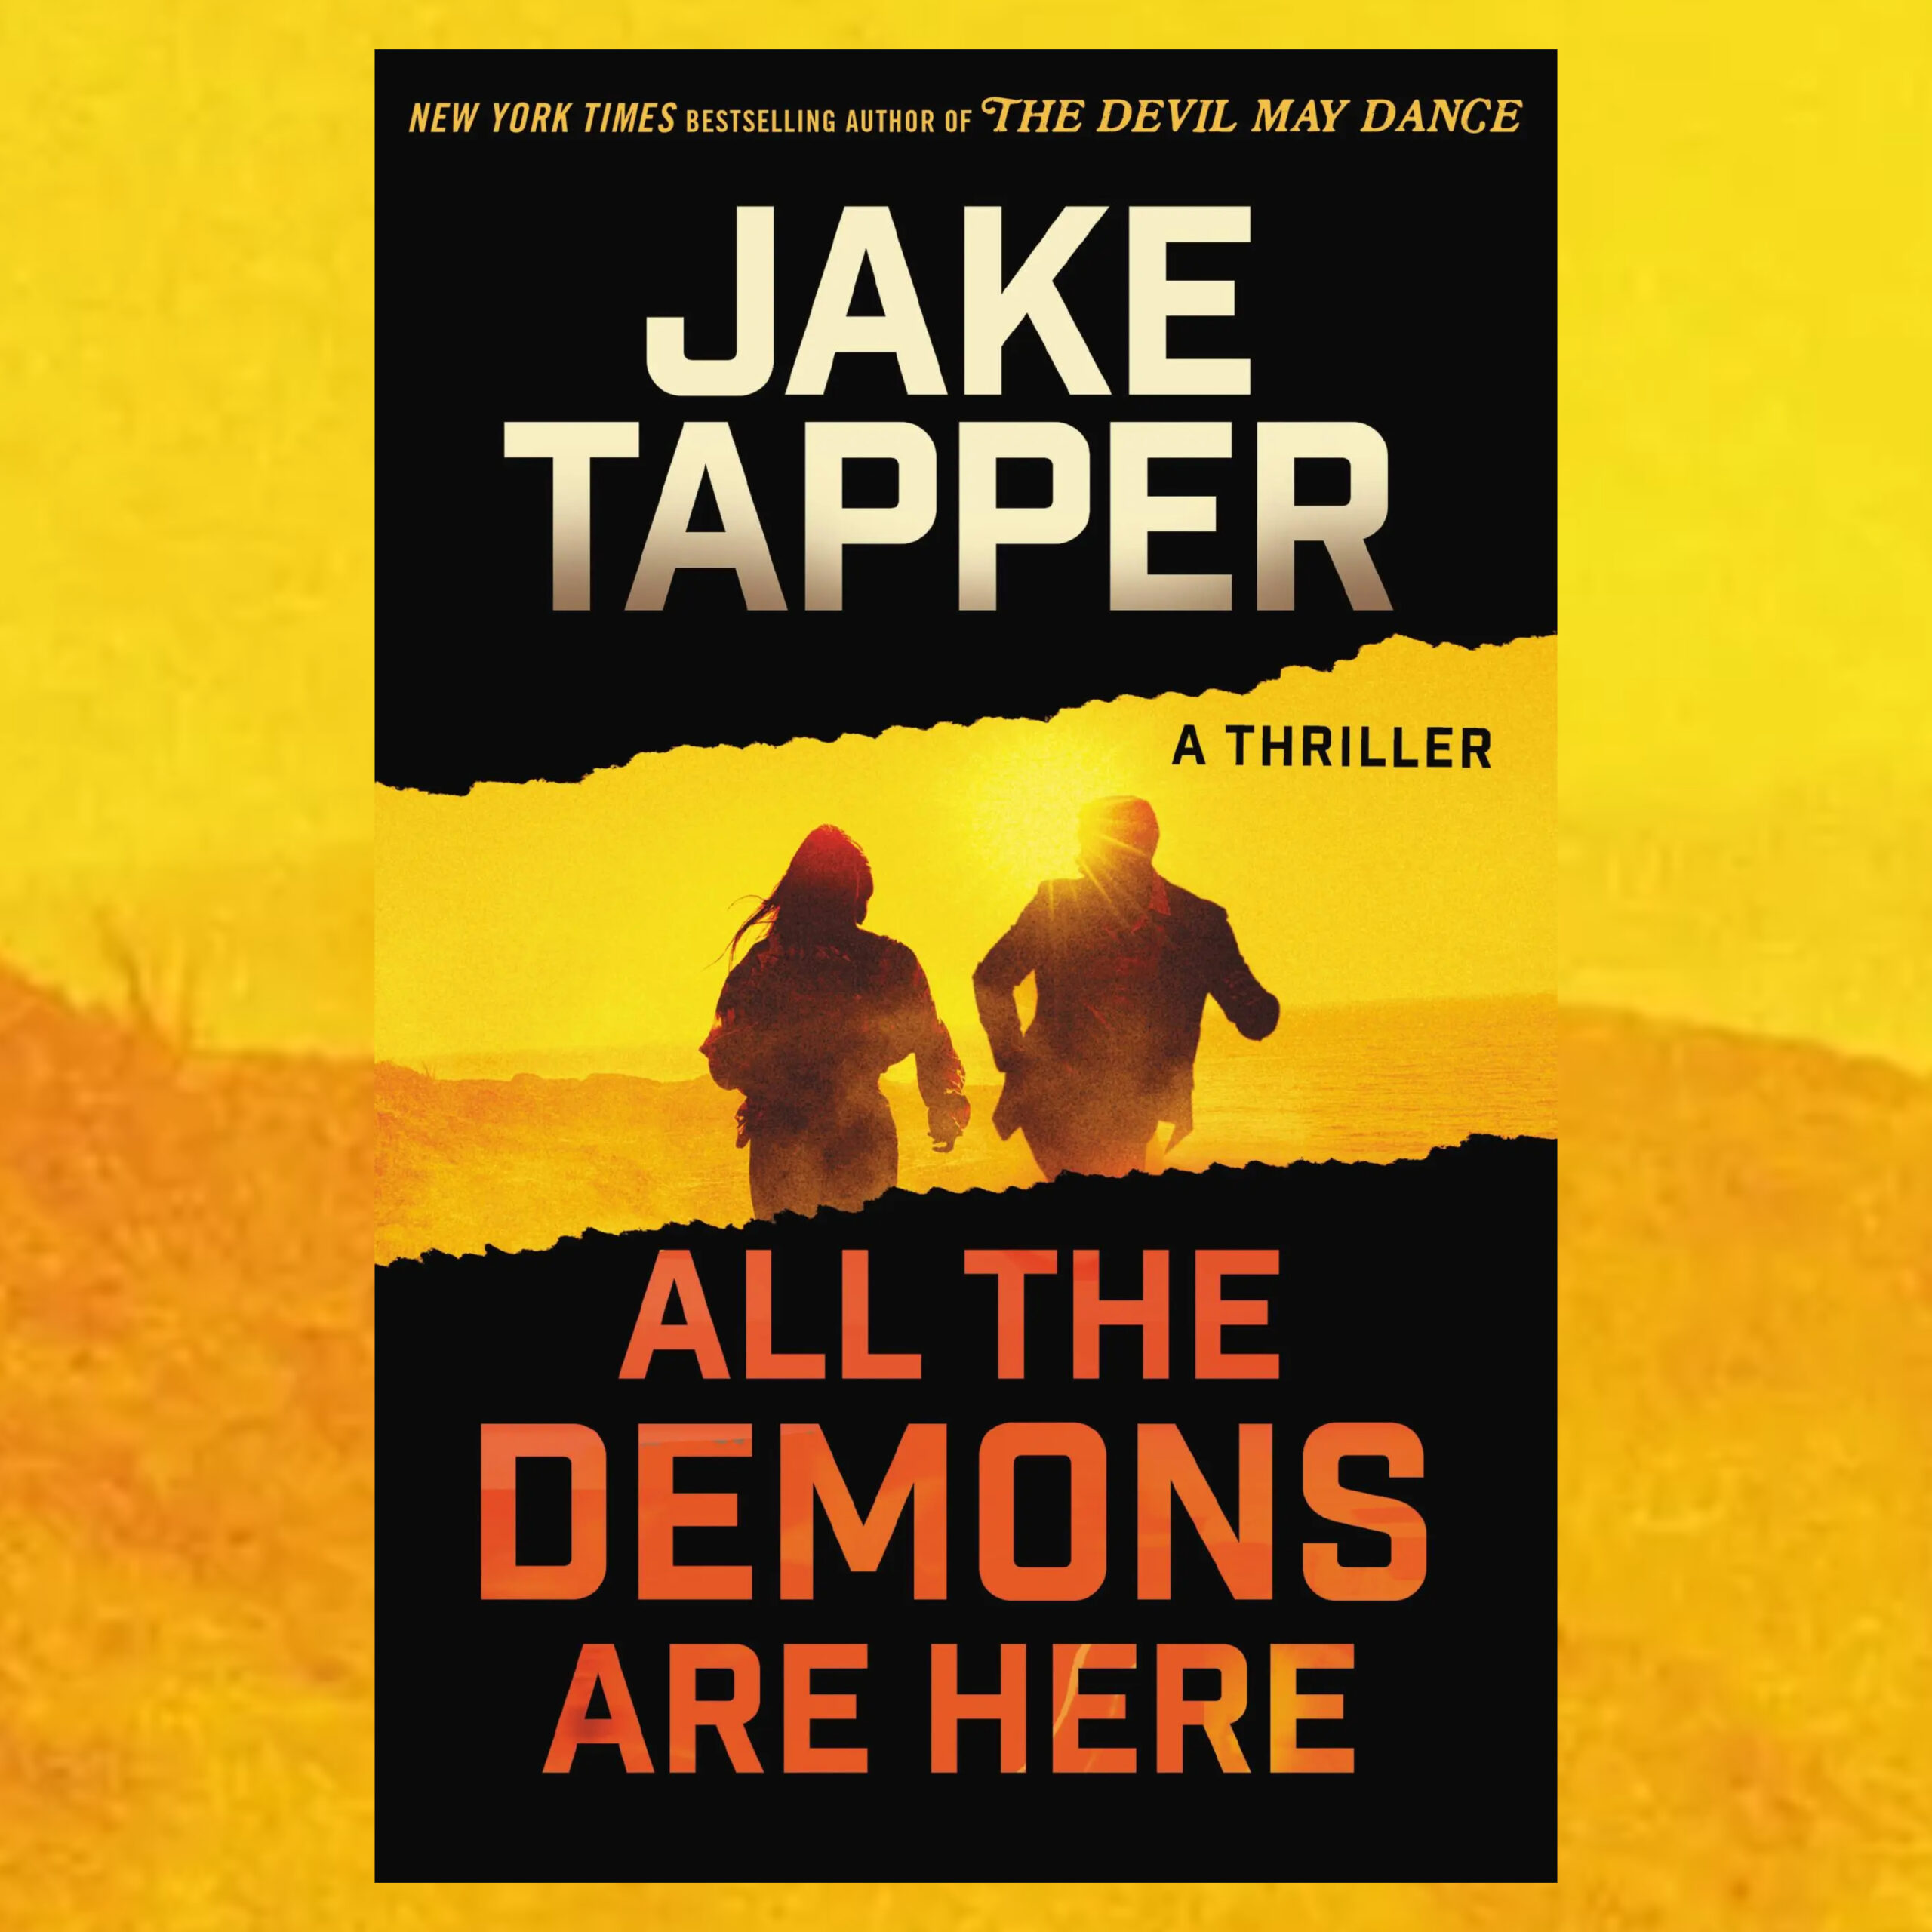 The Book Show | Jake Tapper - All the Demons are Here